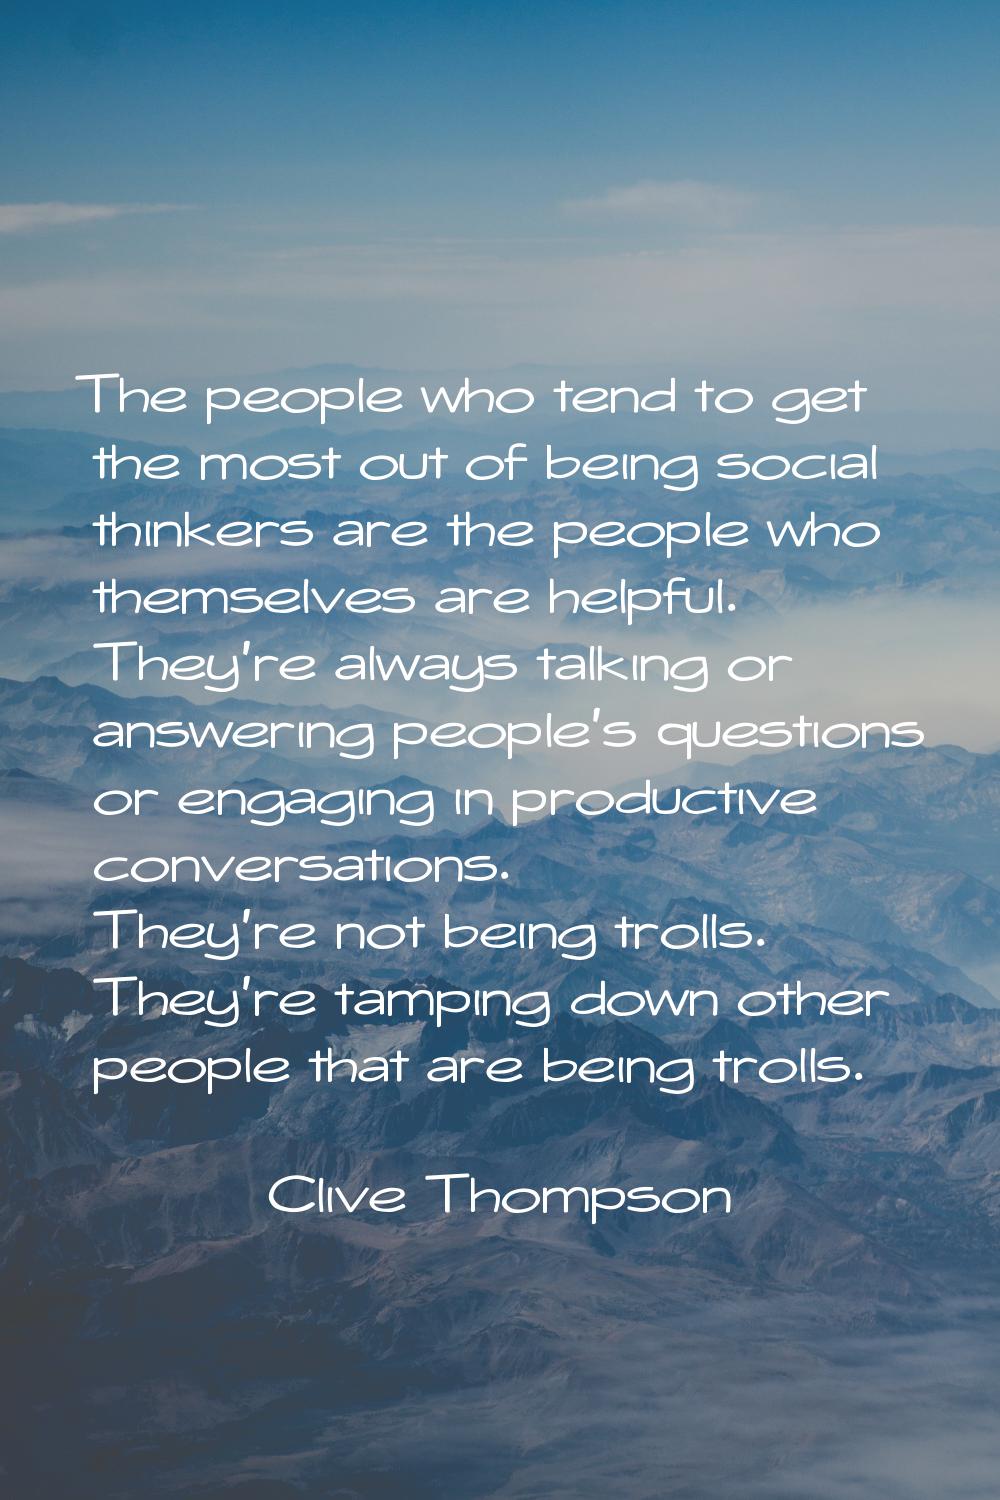 The people who tend to get the most out of being social thinkers are the people who themselves are 